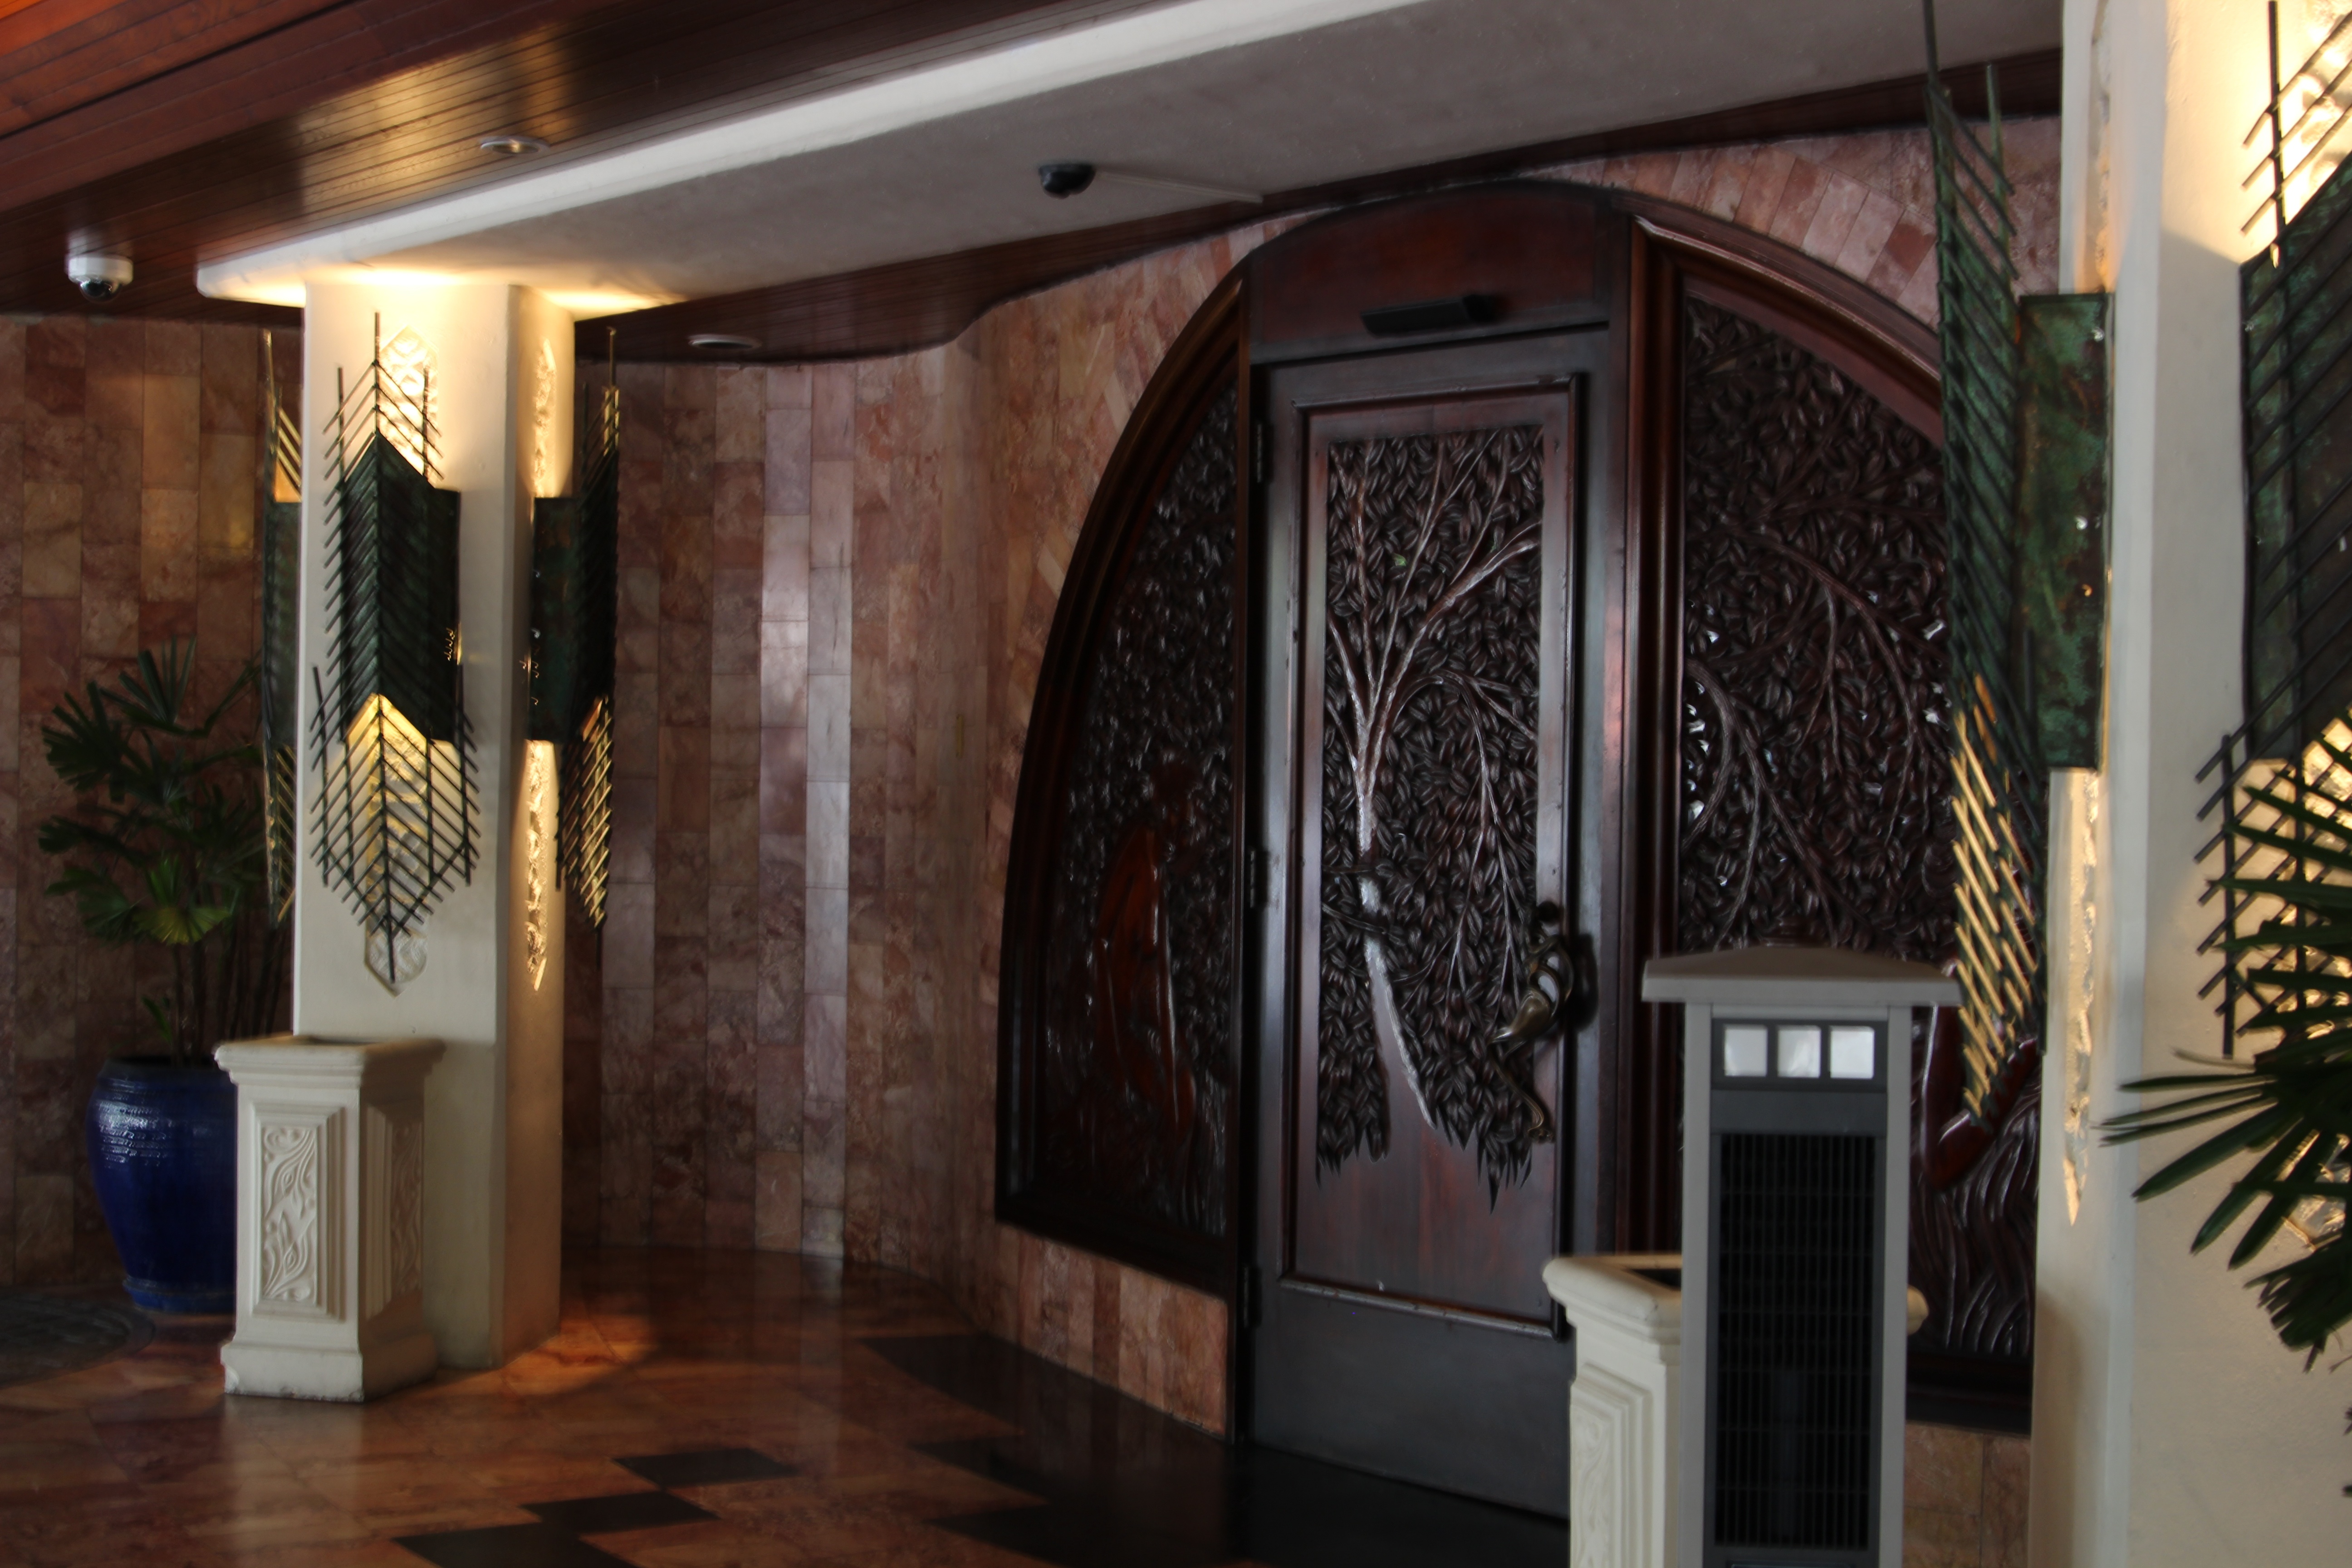 The Gaudi-inspired entrance displays the decorative elegance of the Mayfair Hotel (Photo by Brittany Weiner).